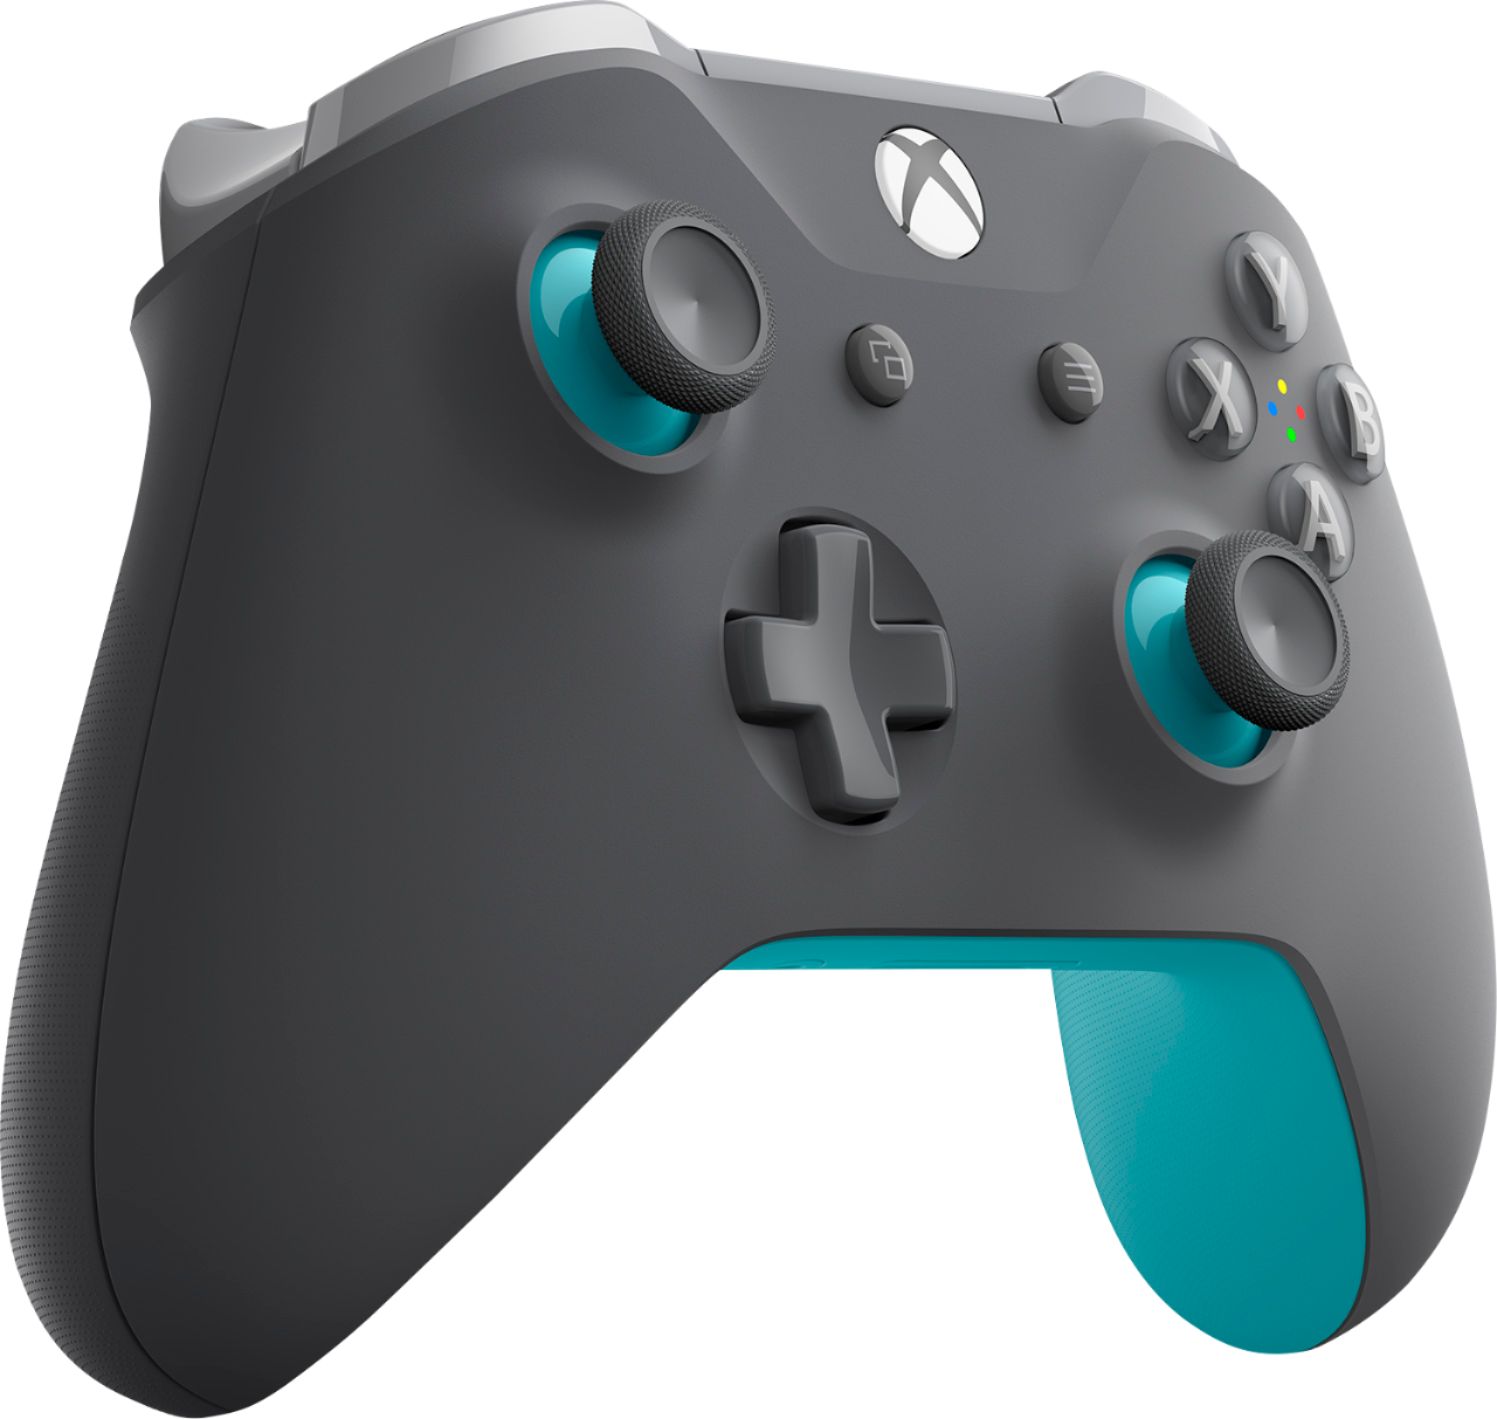 Angle View: Microsoft Xbox Wireless Controller - Gamepad - wireless - Bluetooth - gray, blue - for PC, Microsoft Xbox One, Microsoft Xbox One S, Microsoft Xbox One X